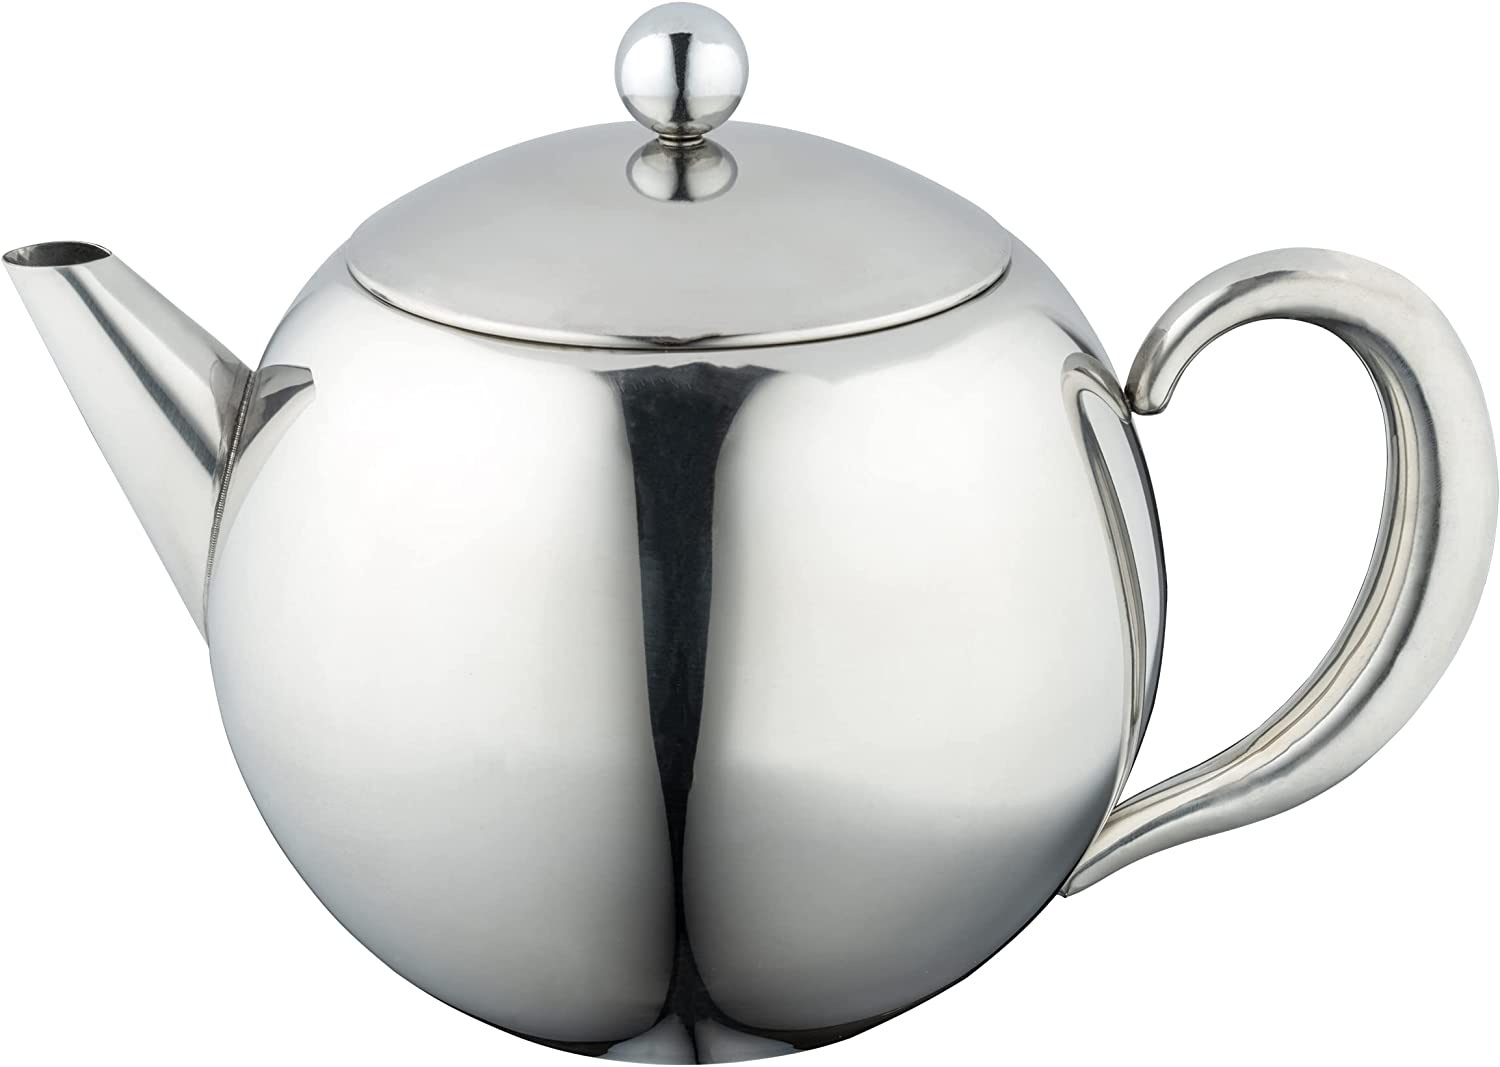 Belmont 17oz/0.5ltr Deluxe Stainless Steel Tea Pot with Removable Infuser